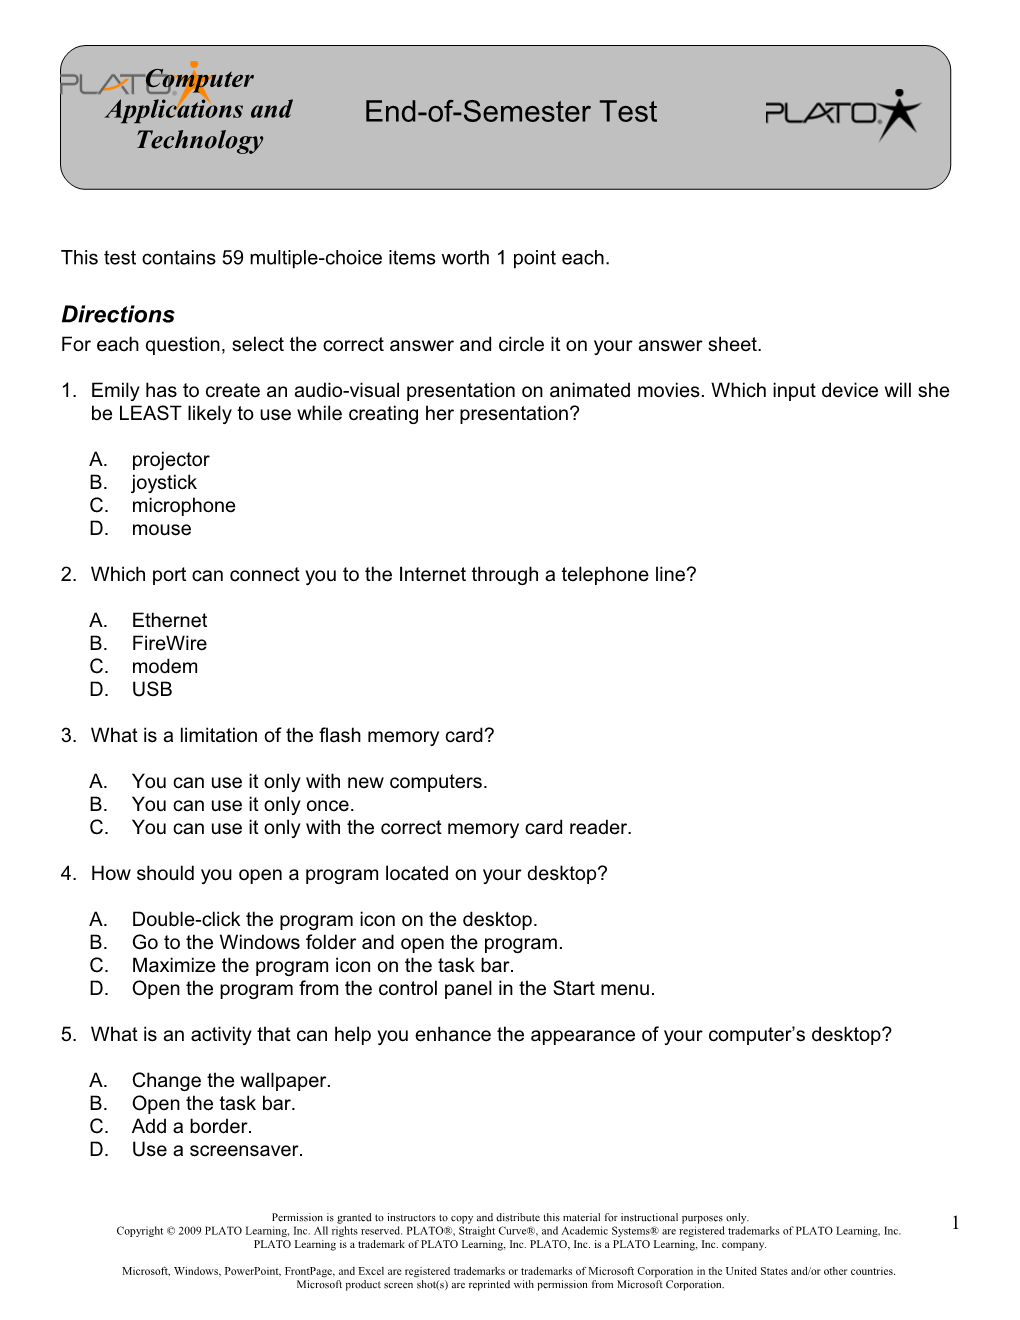 This Test Contains 59 Multiple-Choice Items Worth 1 Point Each